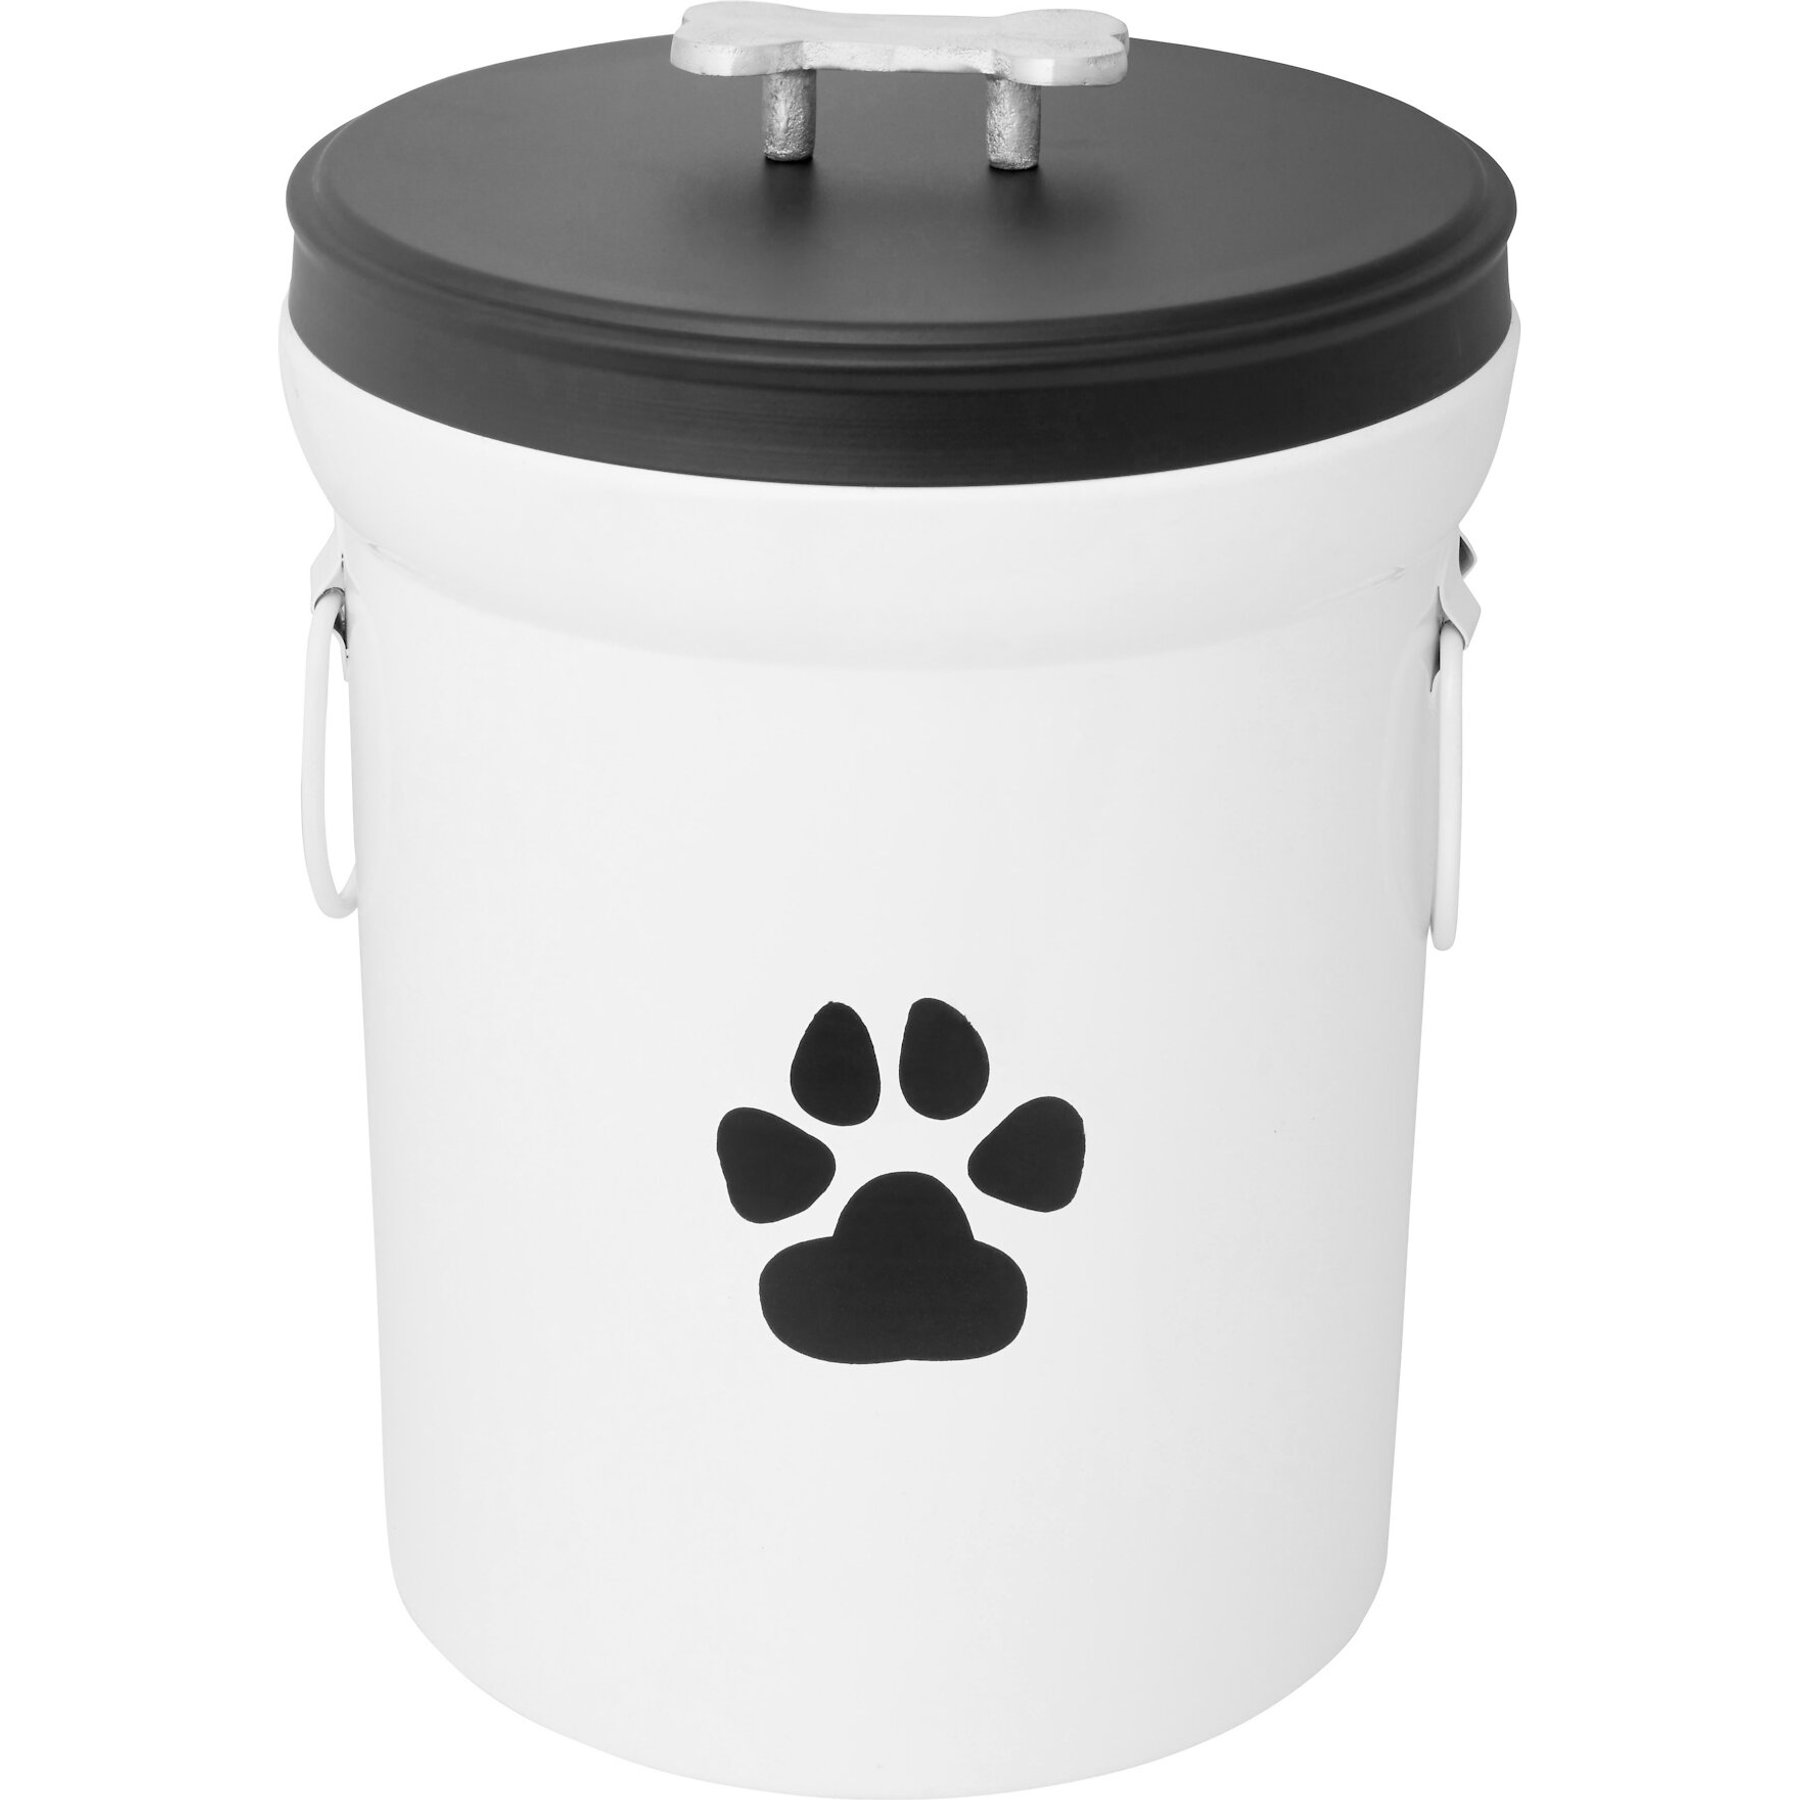 LARGE Airtight Dry Pet Food Storage Container Bin Dog Cat Bird Horse Up to  50lb